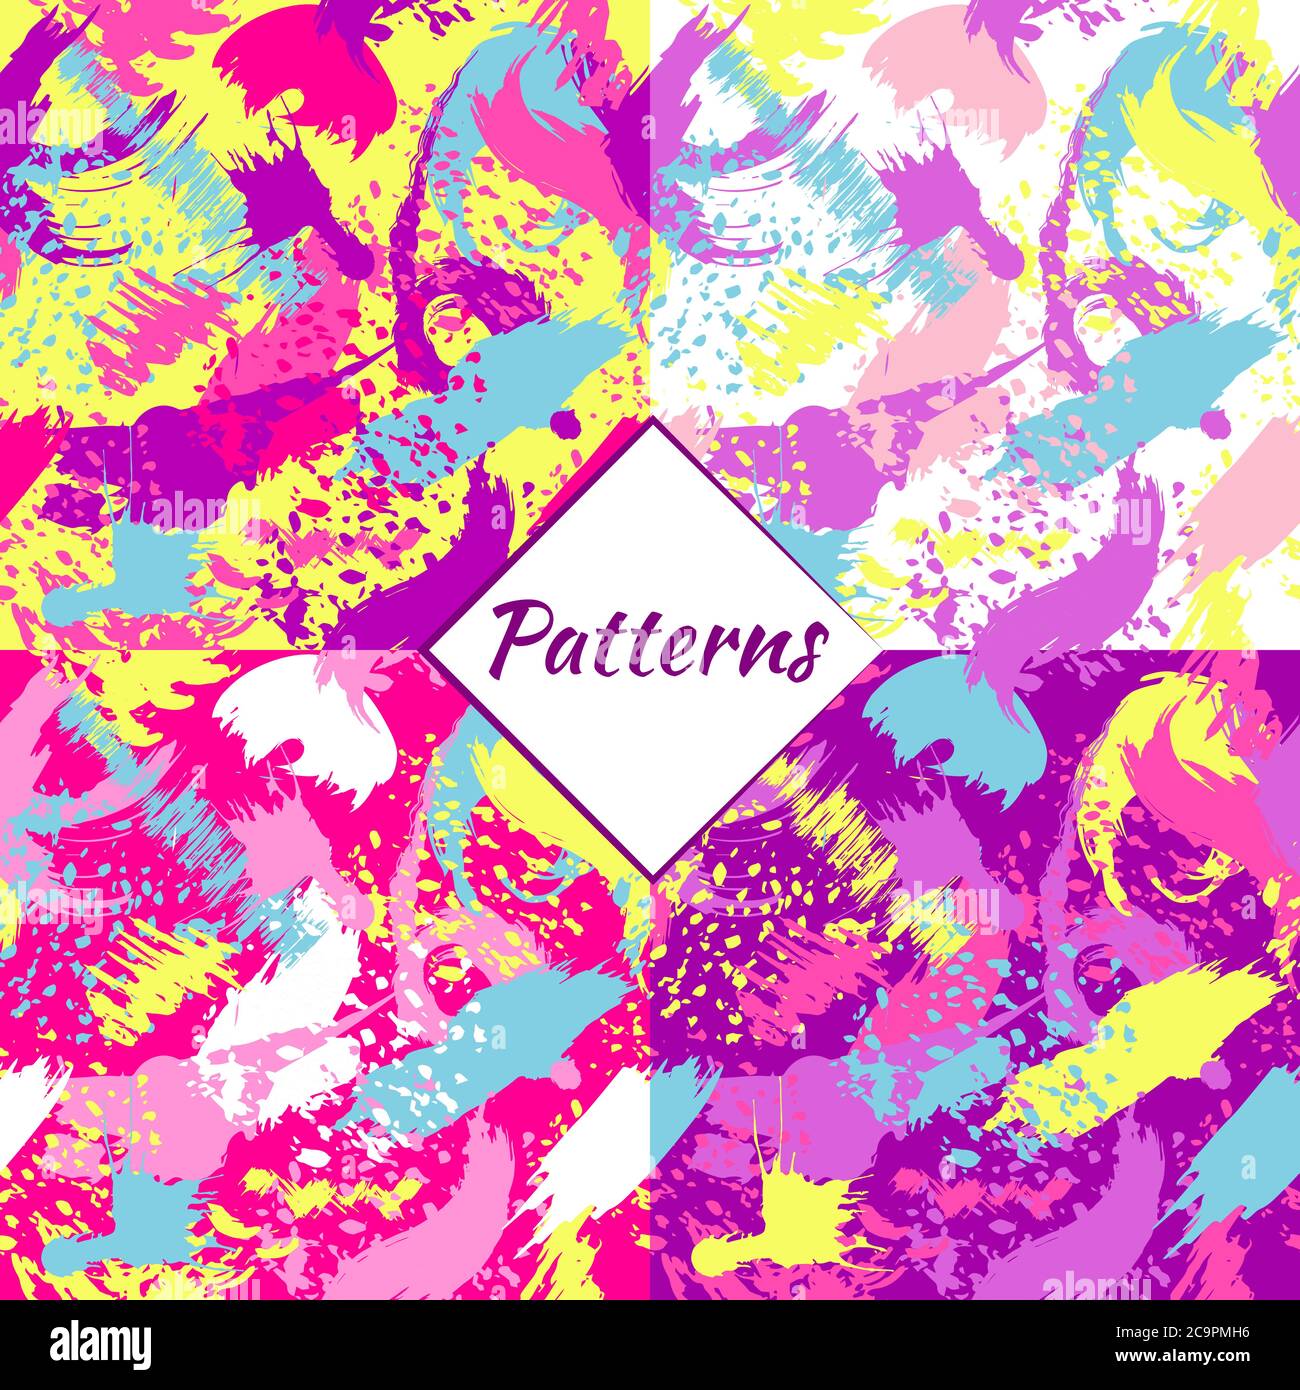 Simless pattern made from random lines, blots, and brush strokes. Random chaotic lines and spots. Stock Vector